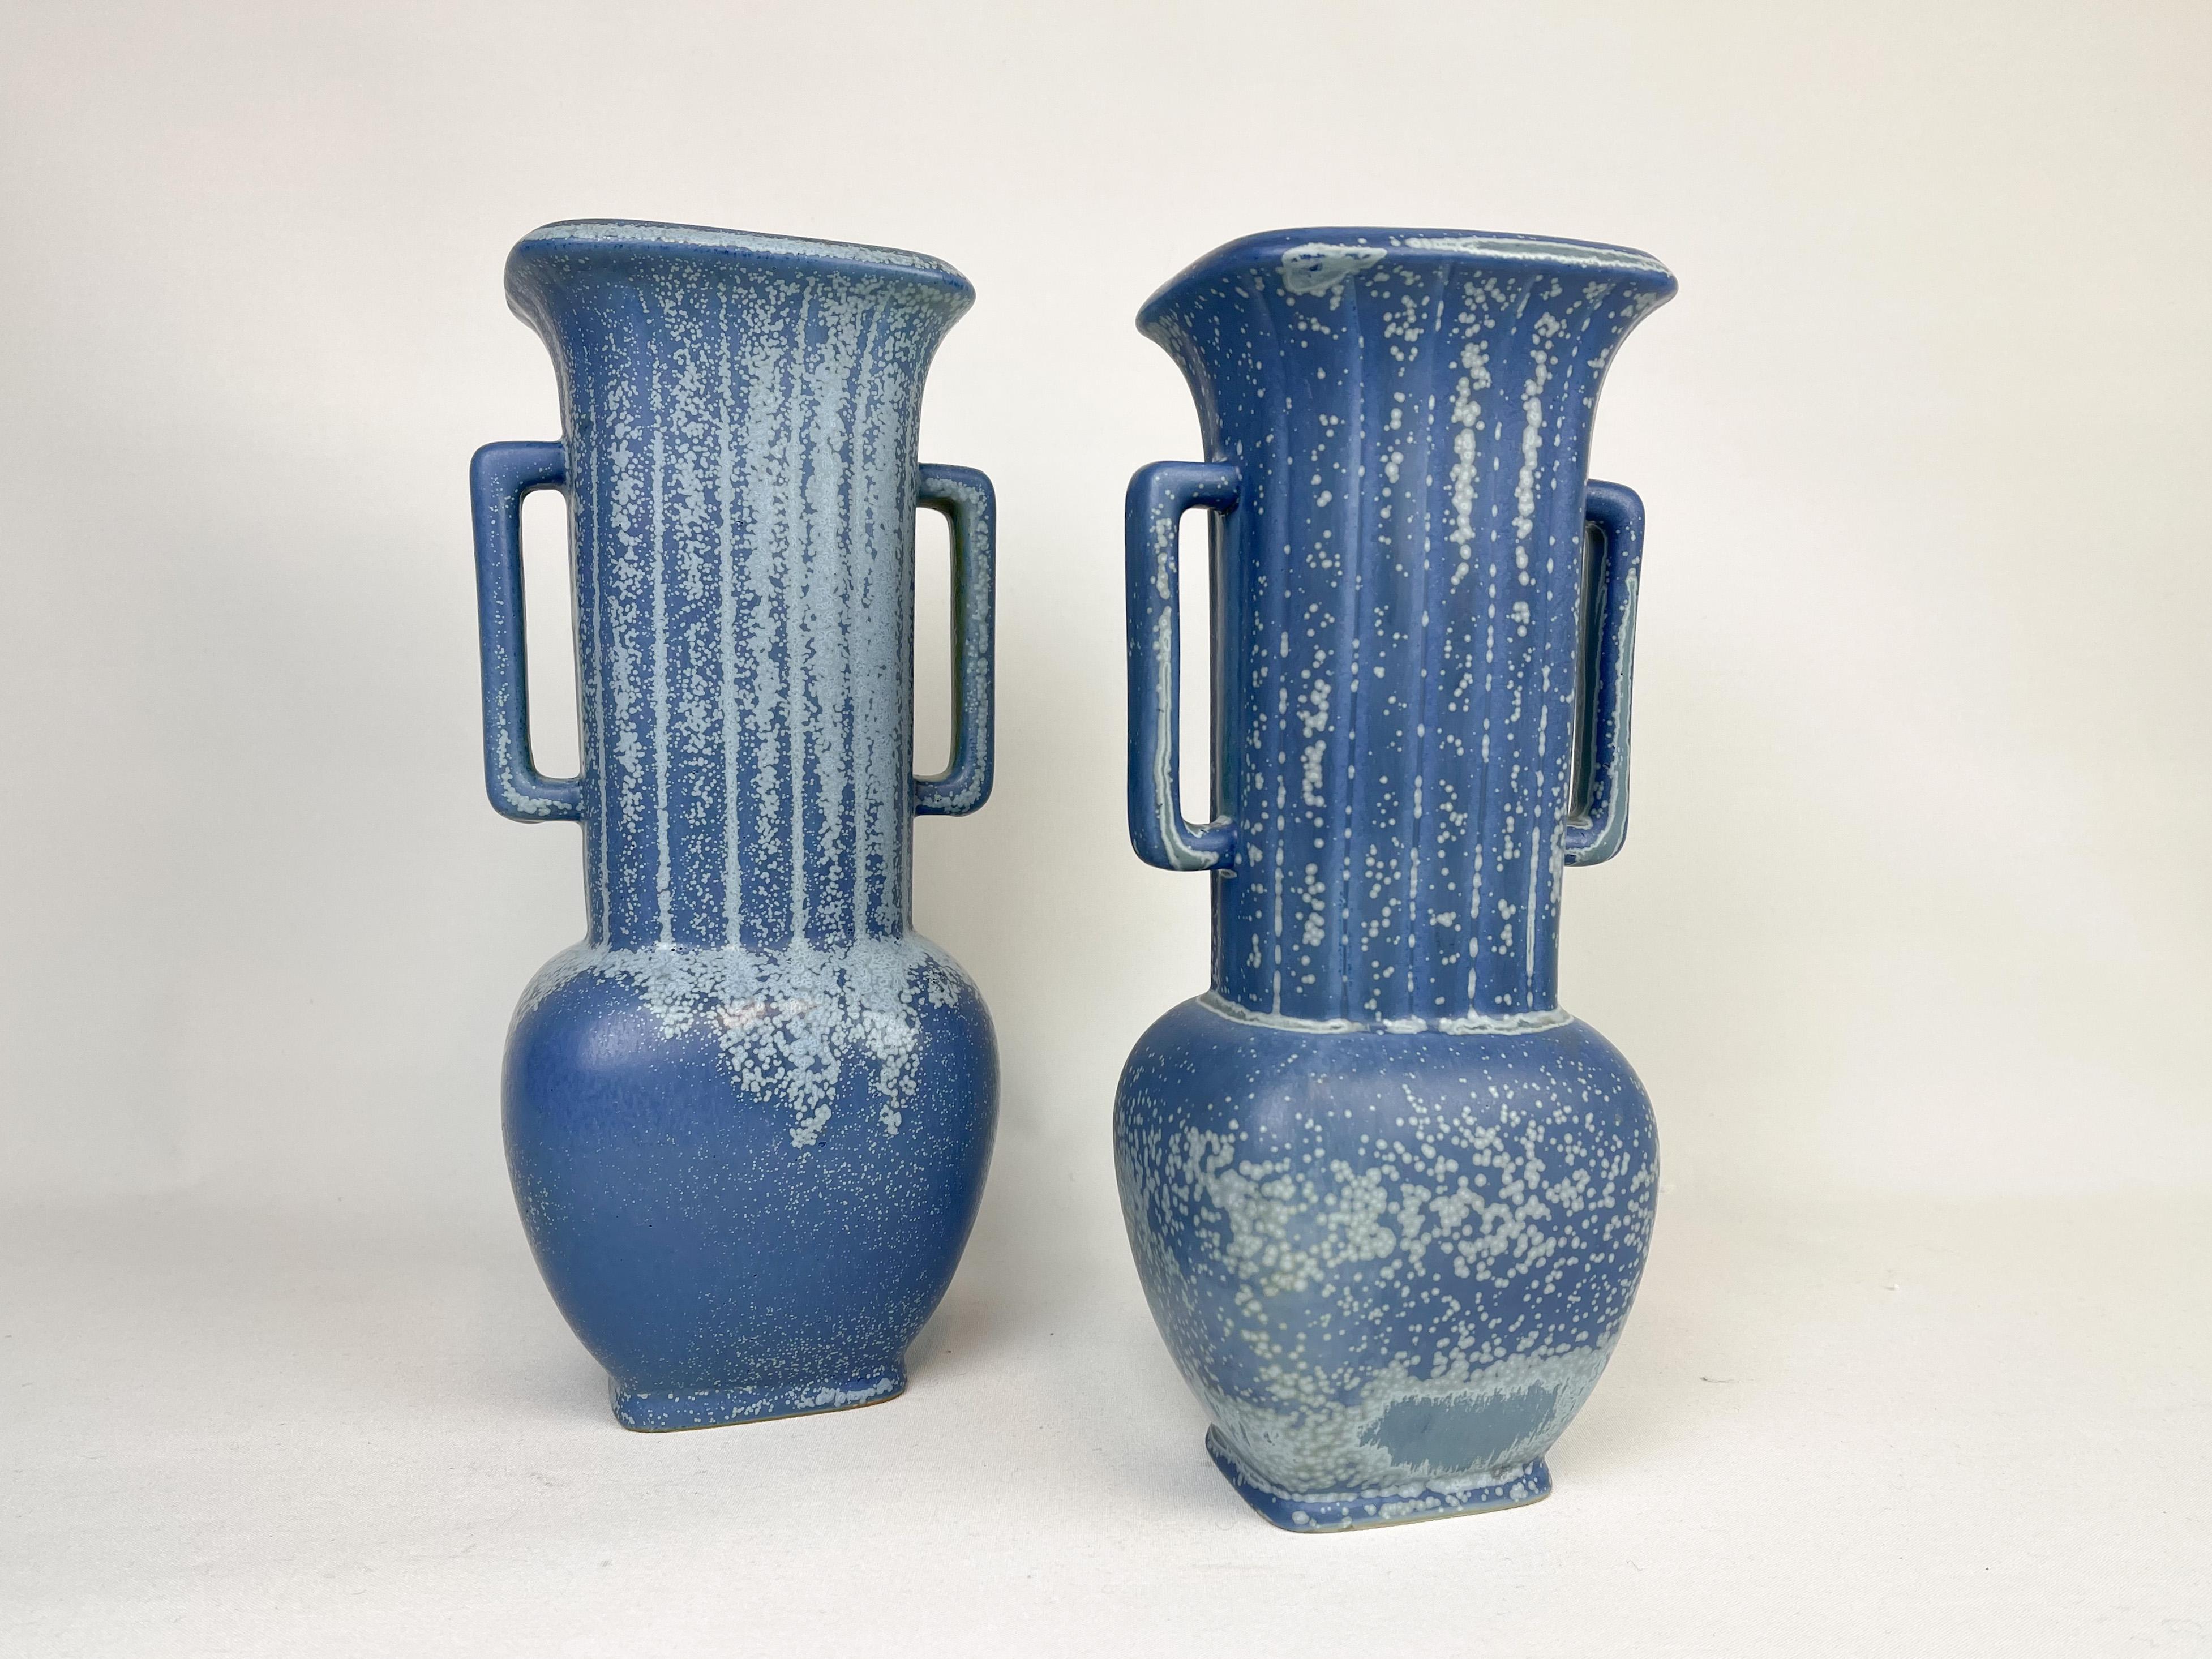 These two wonderful vases were created and designed by Gunnar Nylund at the Rörstrand Factory in the 1950s, Sweden.

Measure: H 31 cm/ W 14cm / D 10 cm and H 28 cm / W 12 / D 10 

Good condition small blue overtone on base on one.
 